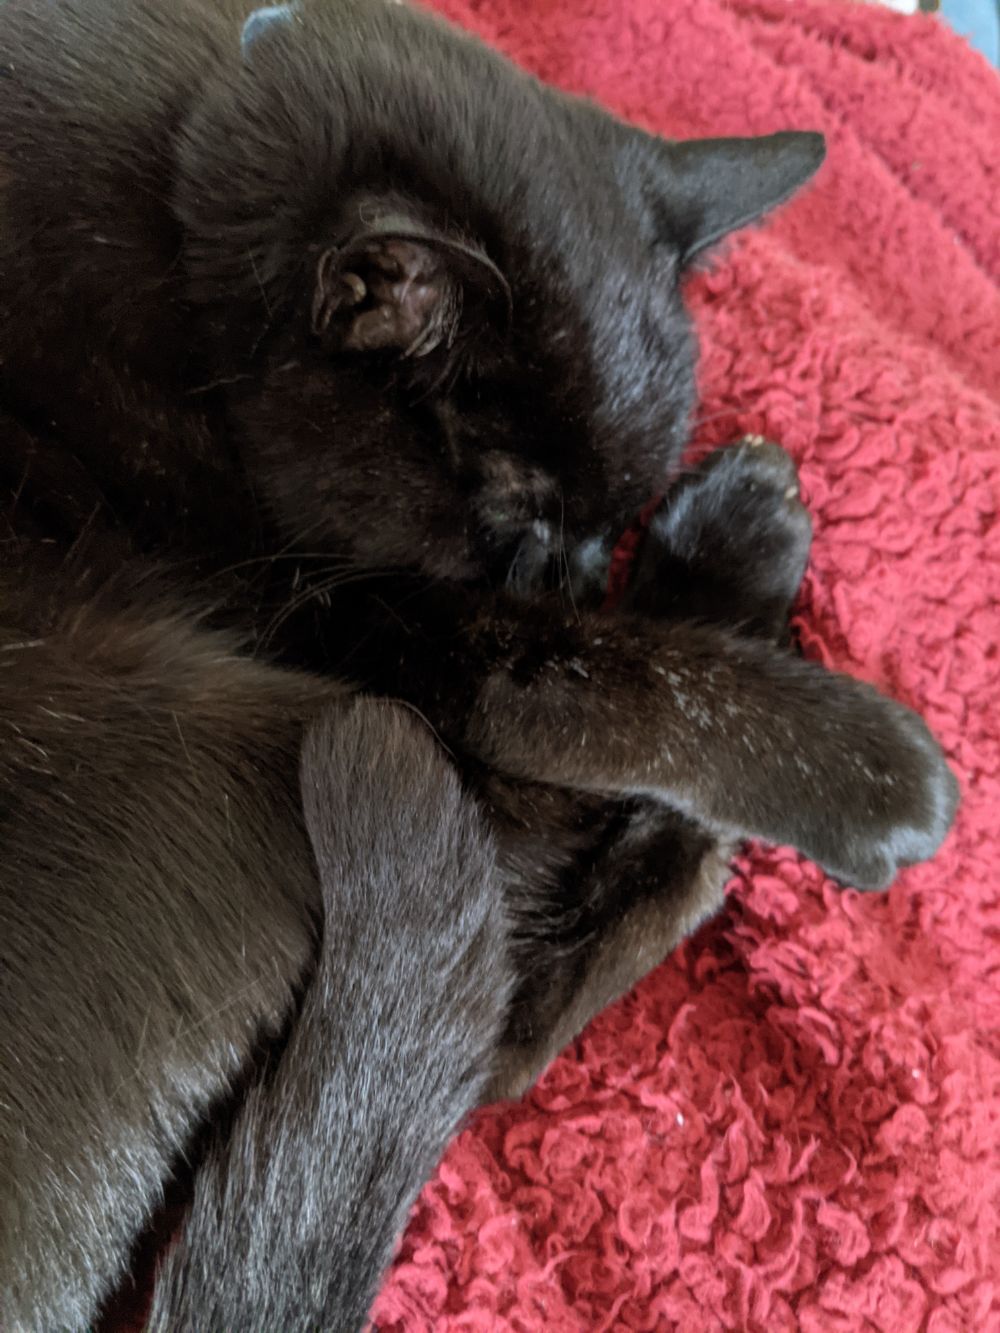 Black cat (Morph) curled up on a red blanket with all his paws and his tail all curled up together